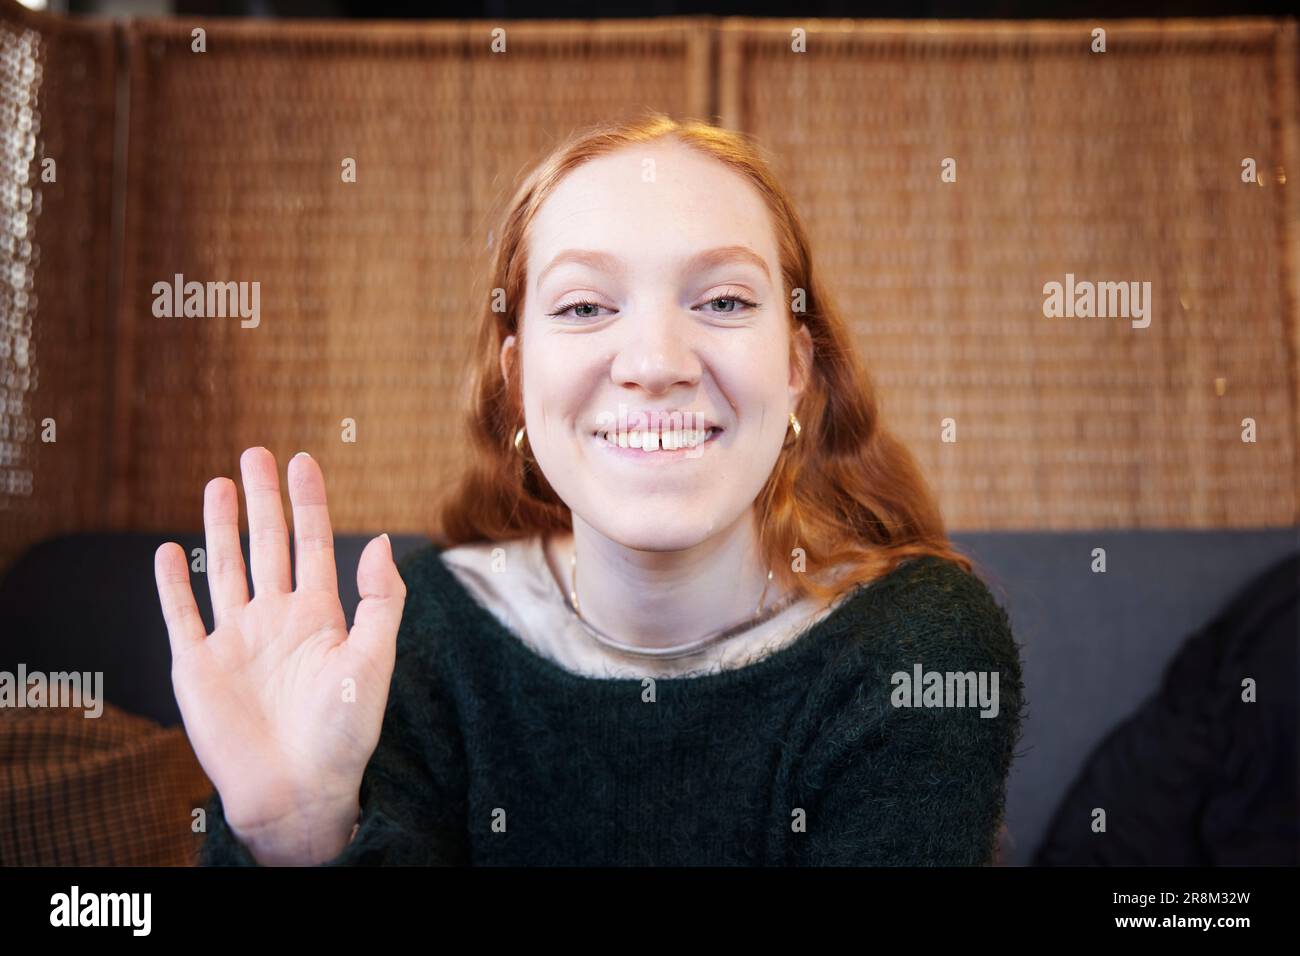 Portrait of smiling woman looking and waiving at camera Stock Photo